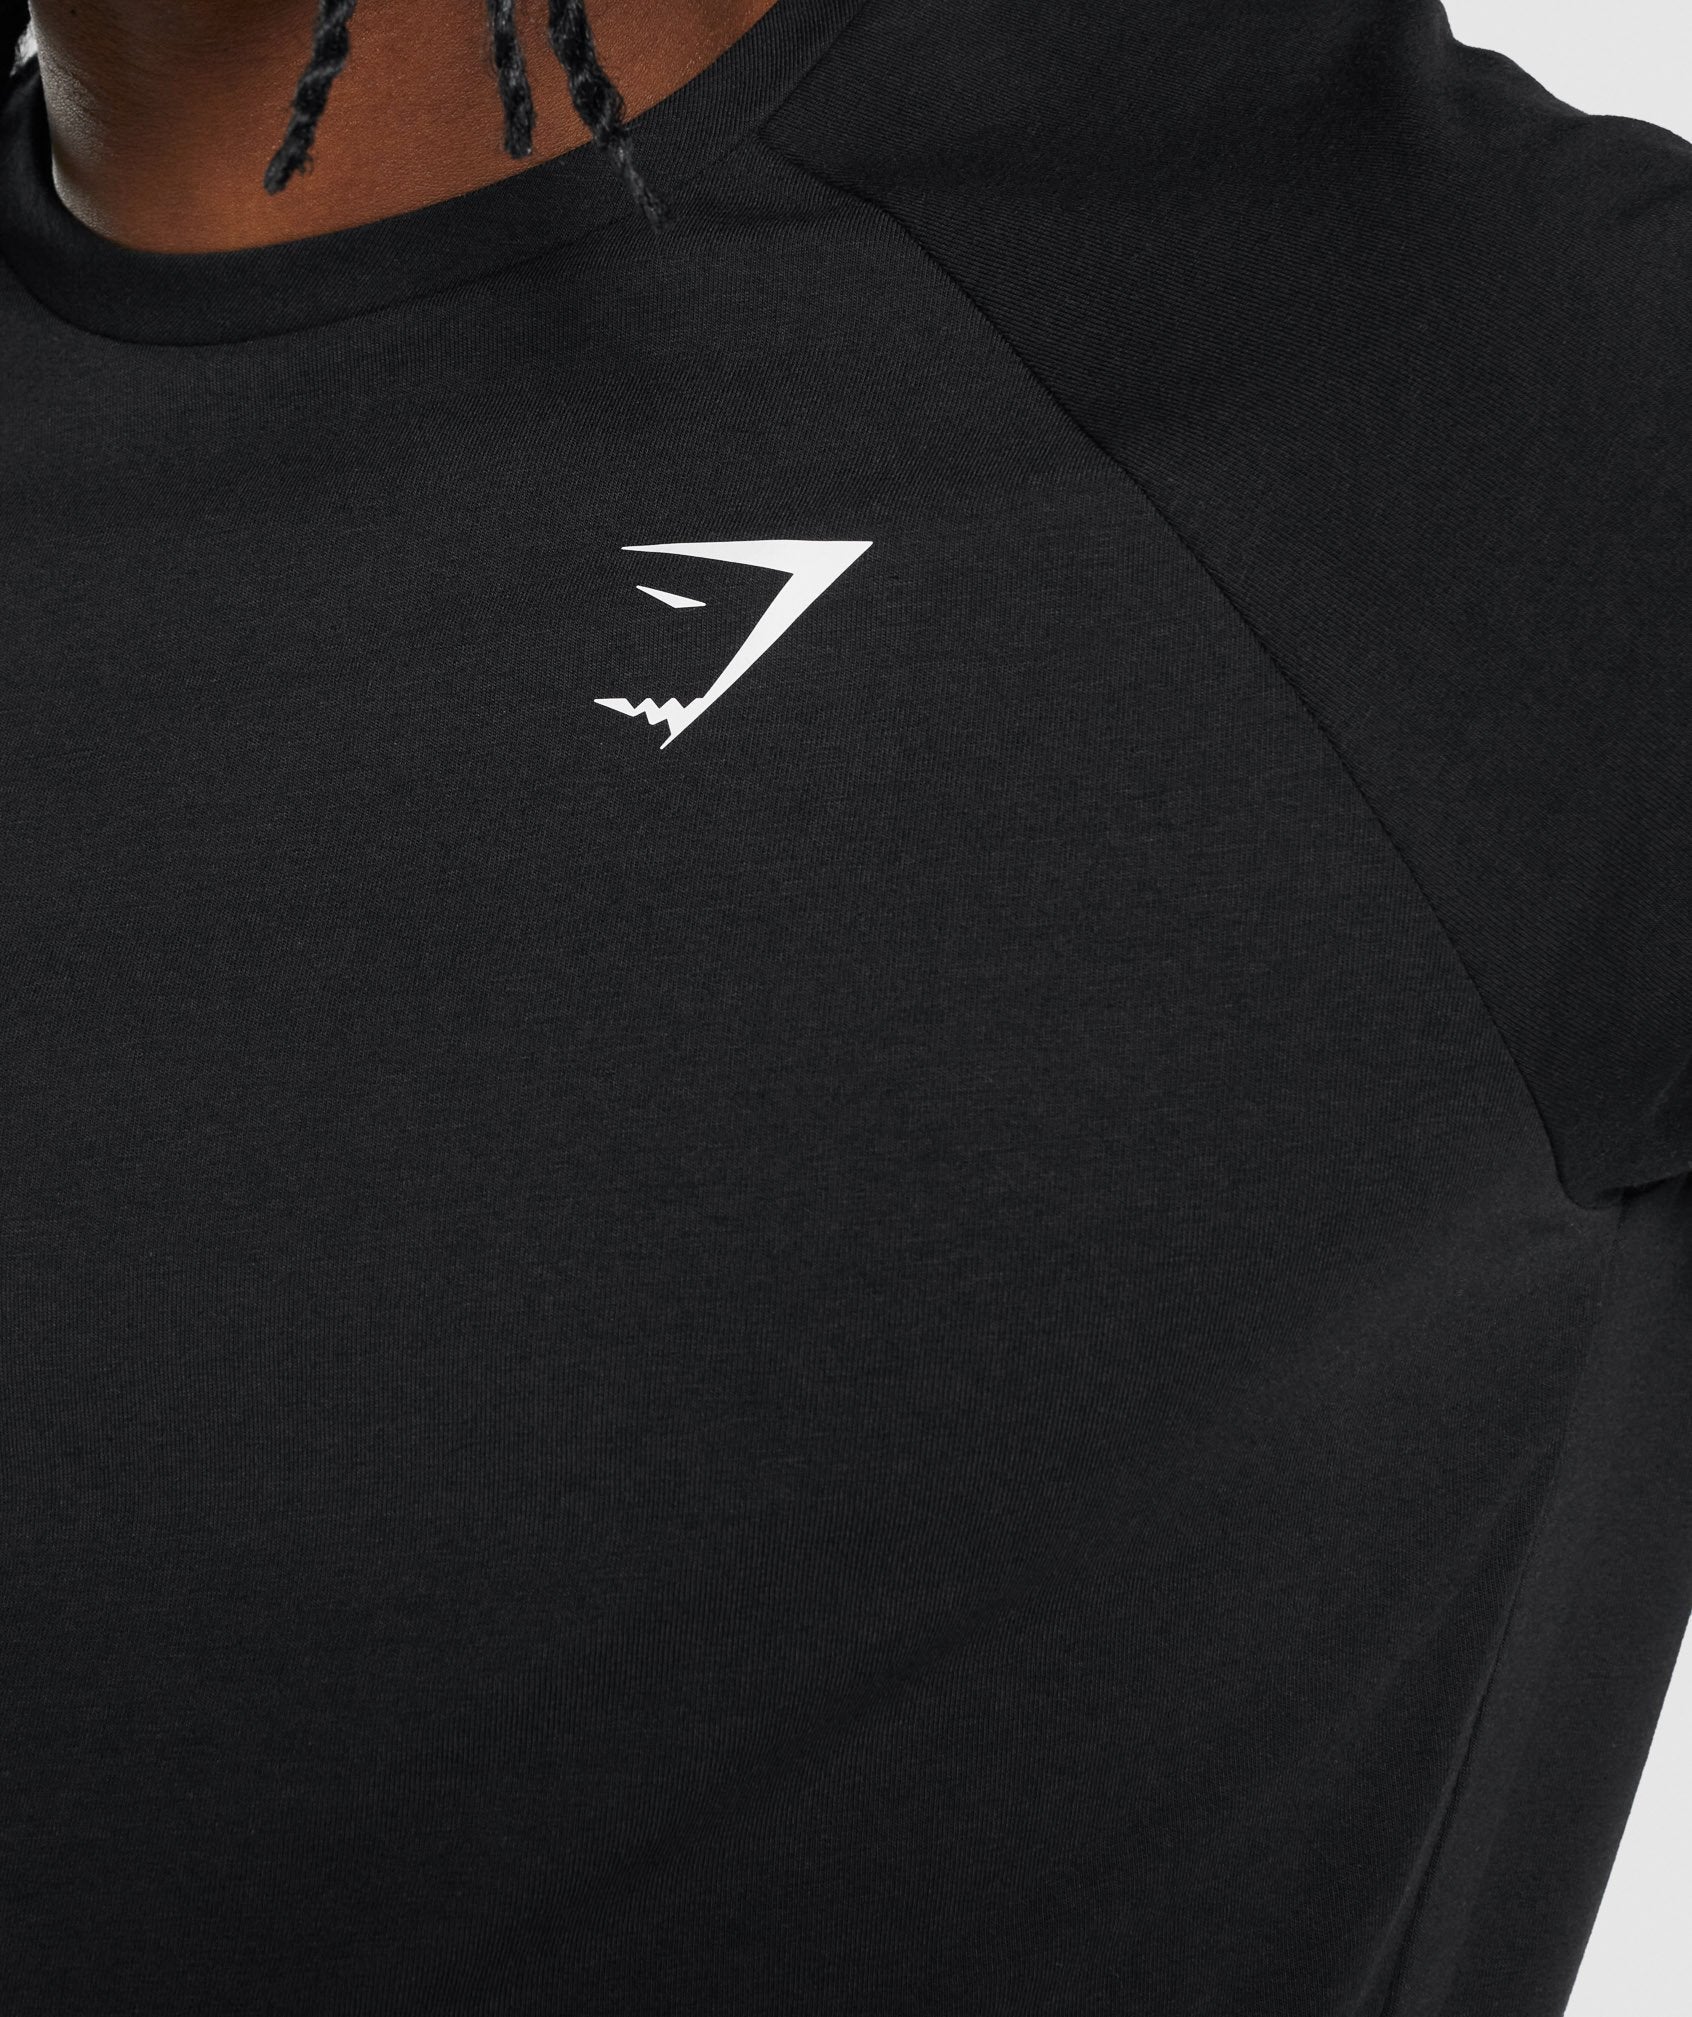 Critical 2.0 T-Shirt in Black - view 6